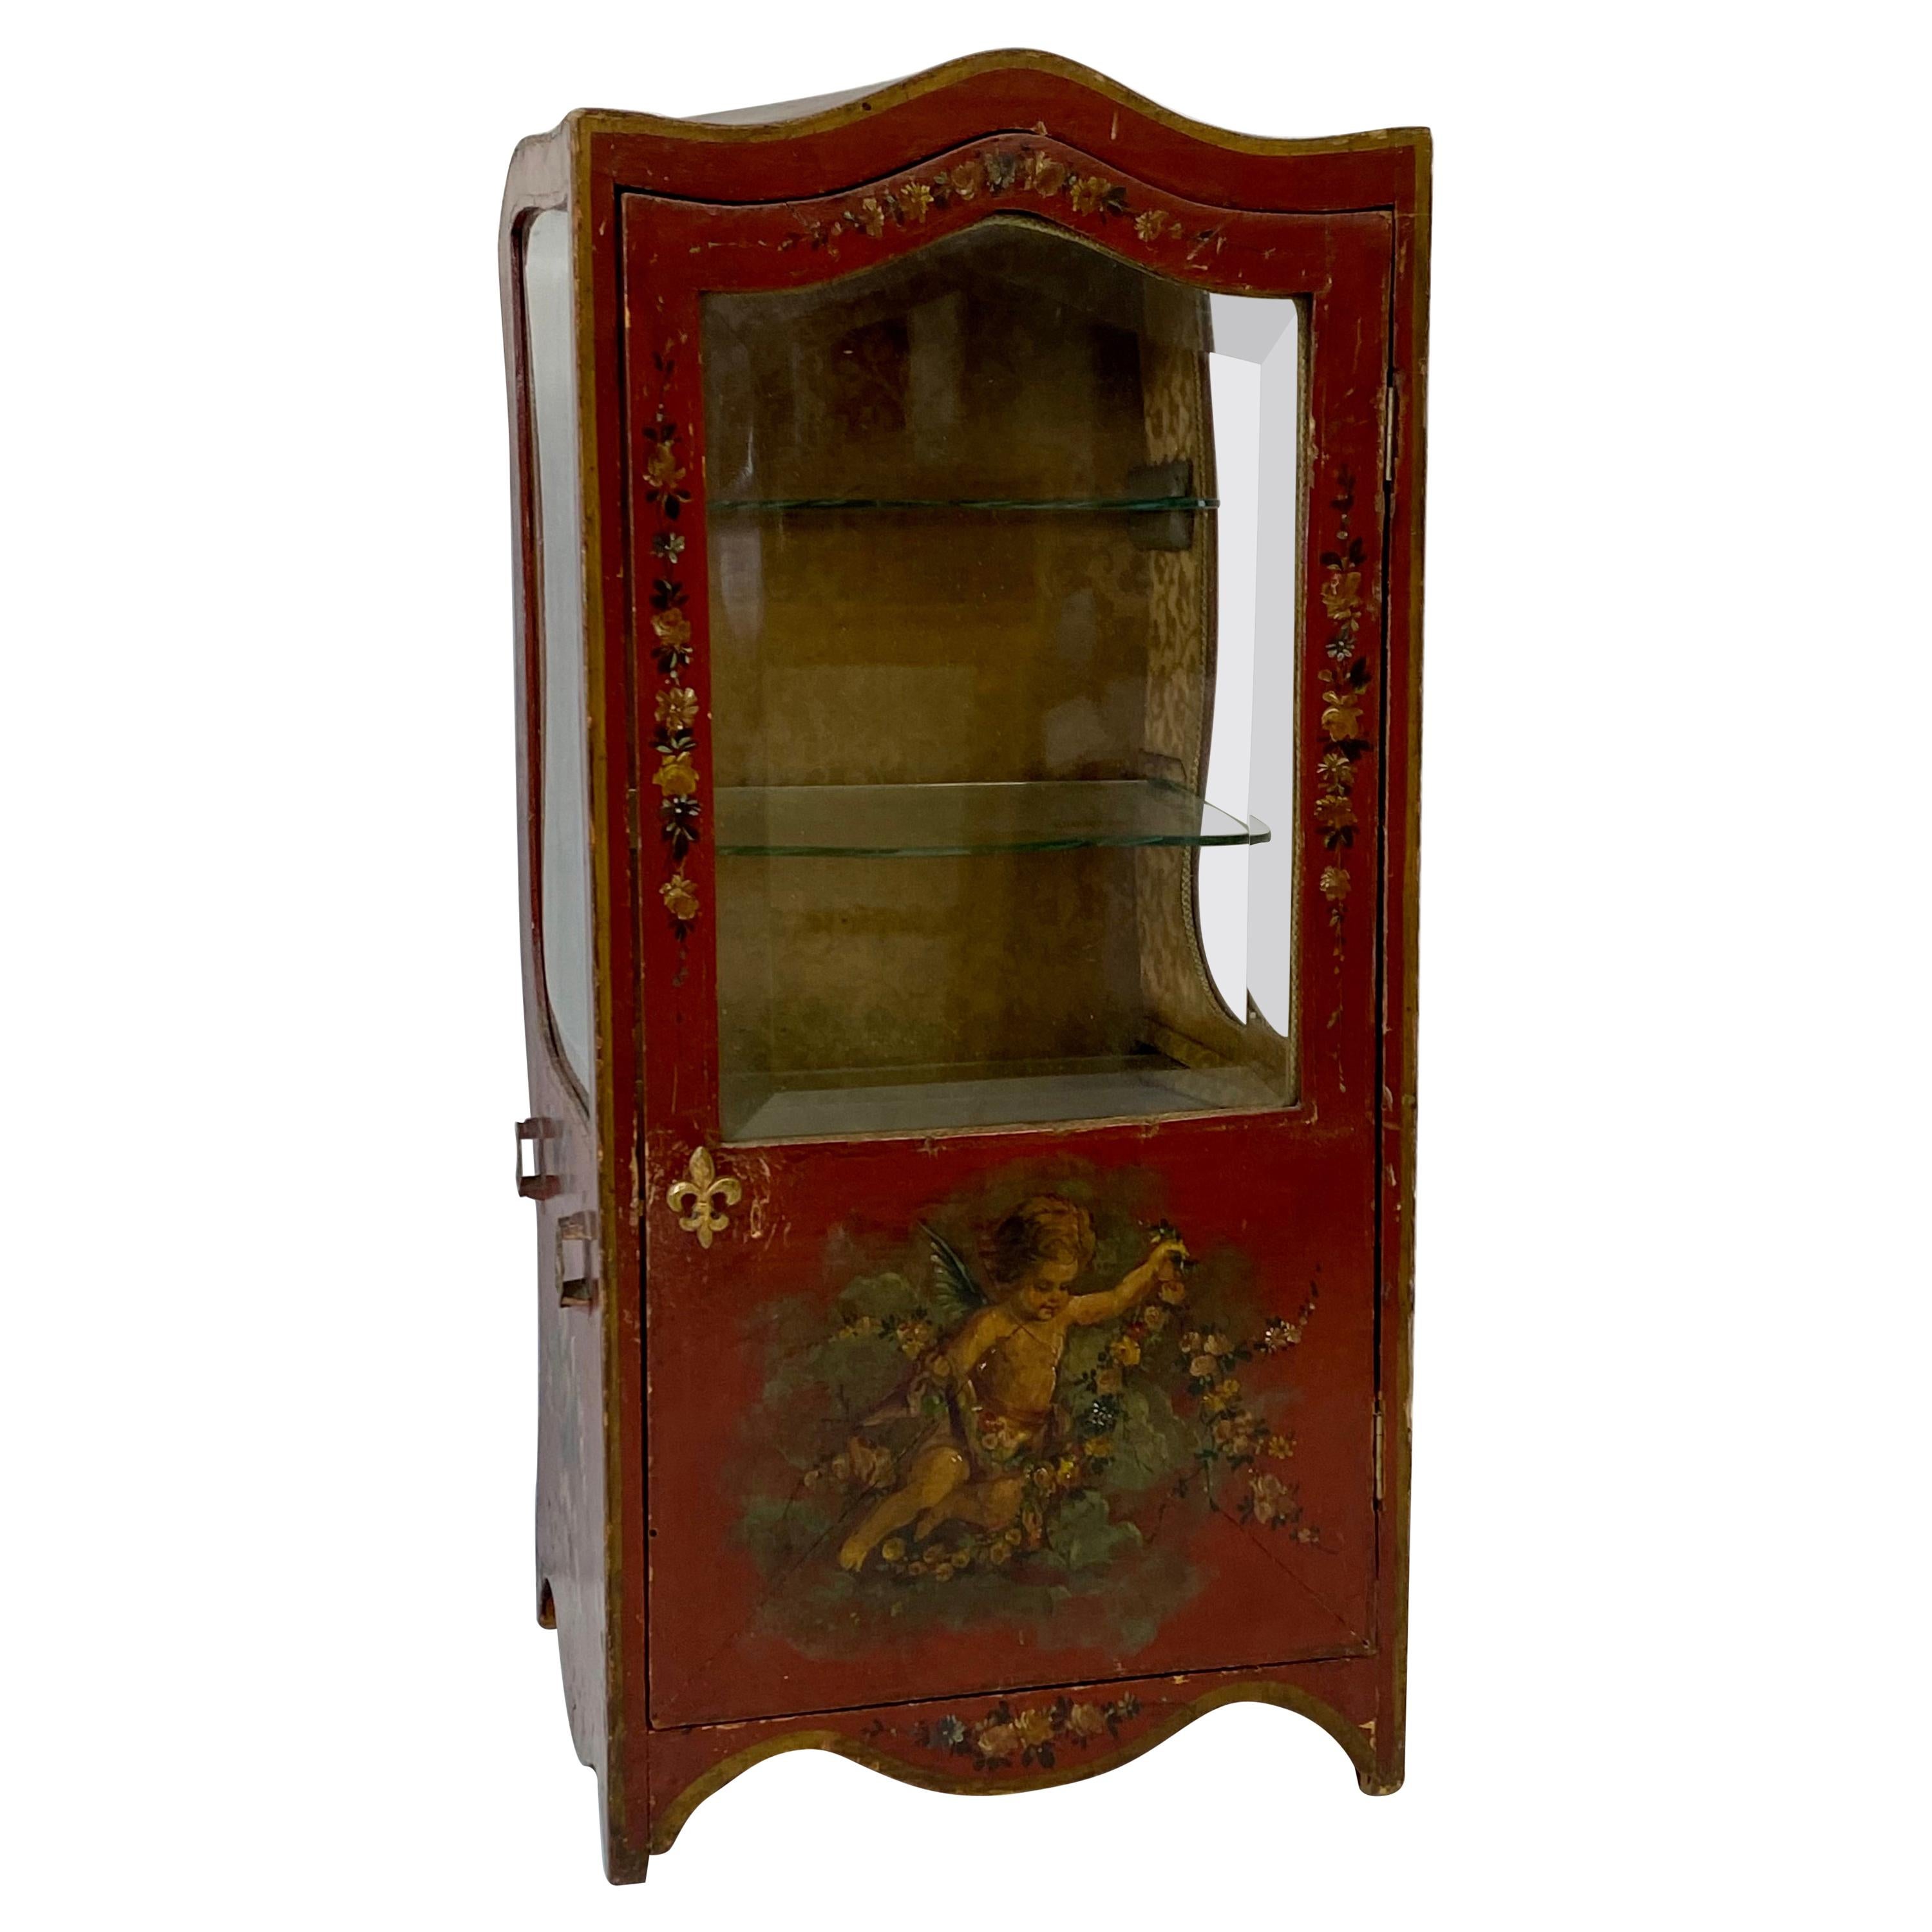 Late 19th to Early 20th Century Sedan Chair Miniature Table Top Display Cabinet For Sale